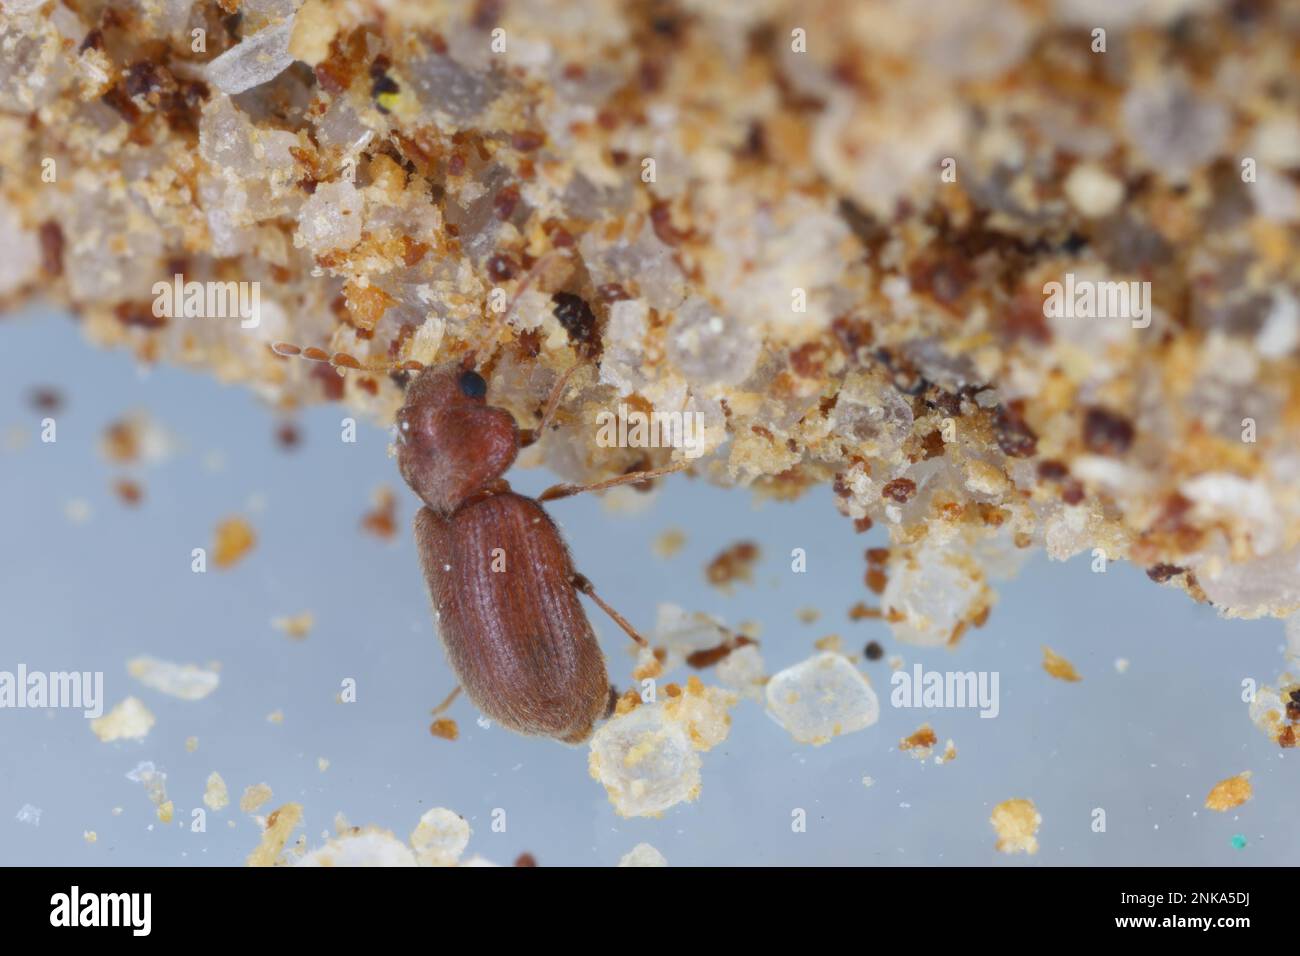 Biscuit, drugstore or bread beetle (Stegobium paniceum) adult stored product pest in the spices. Stock Photo